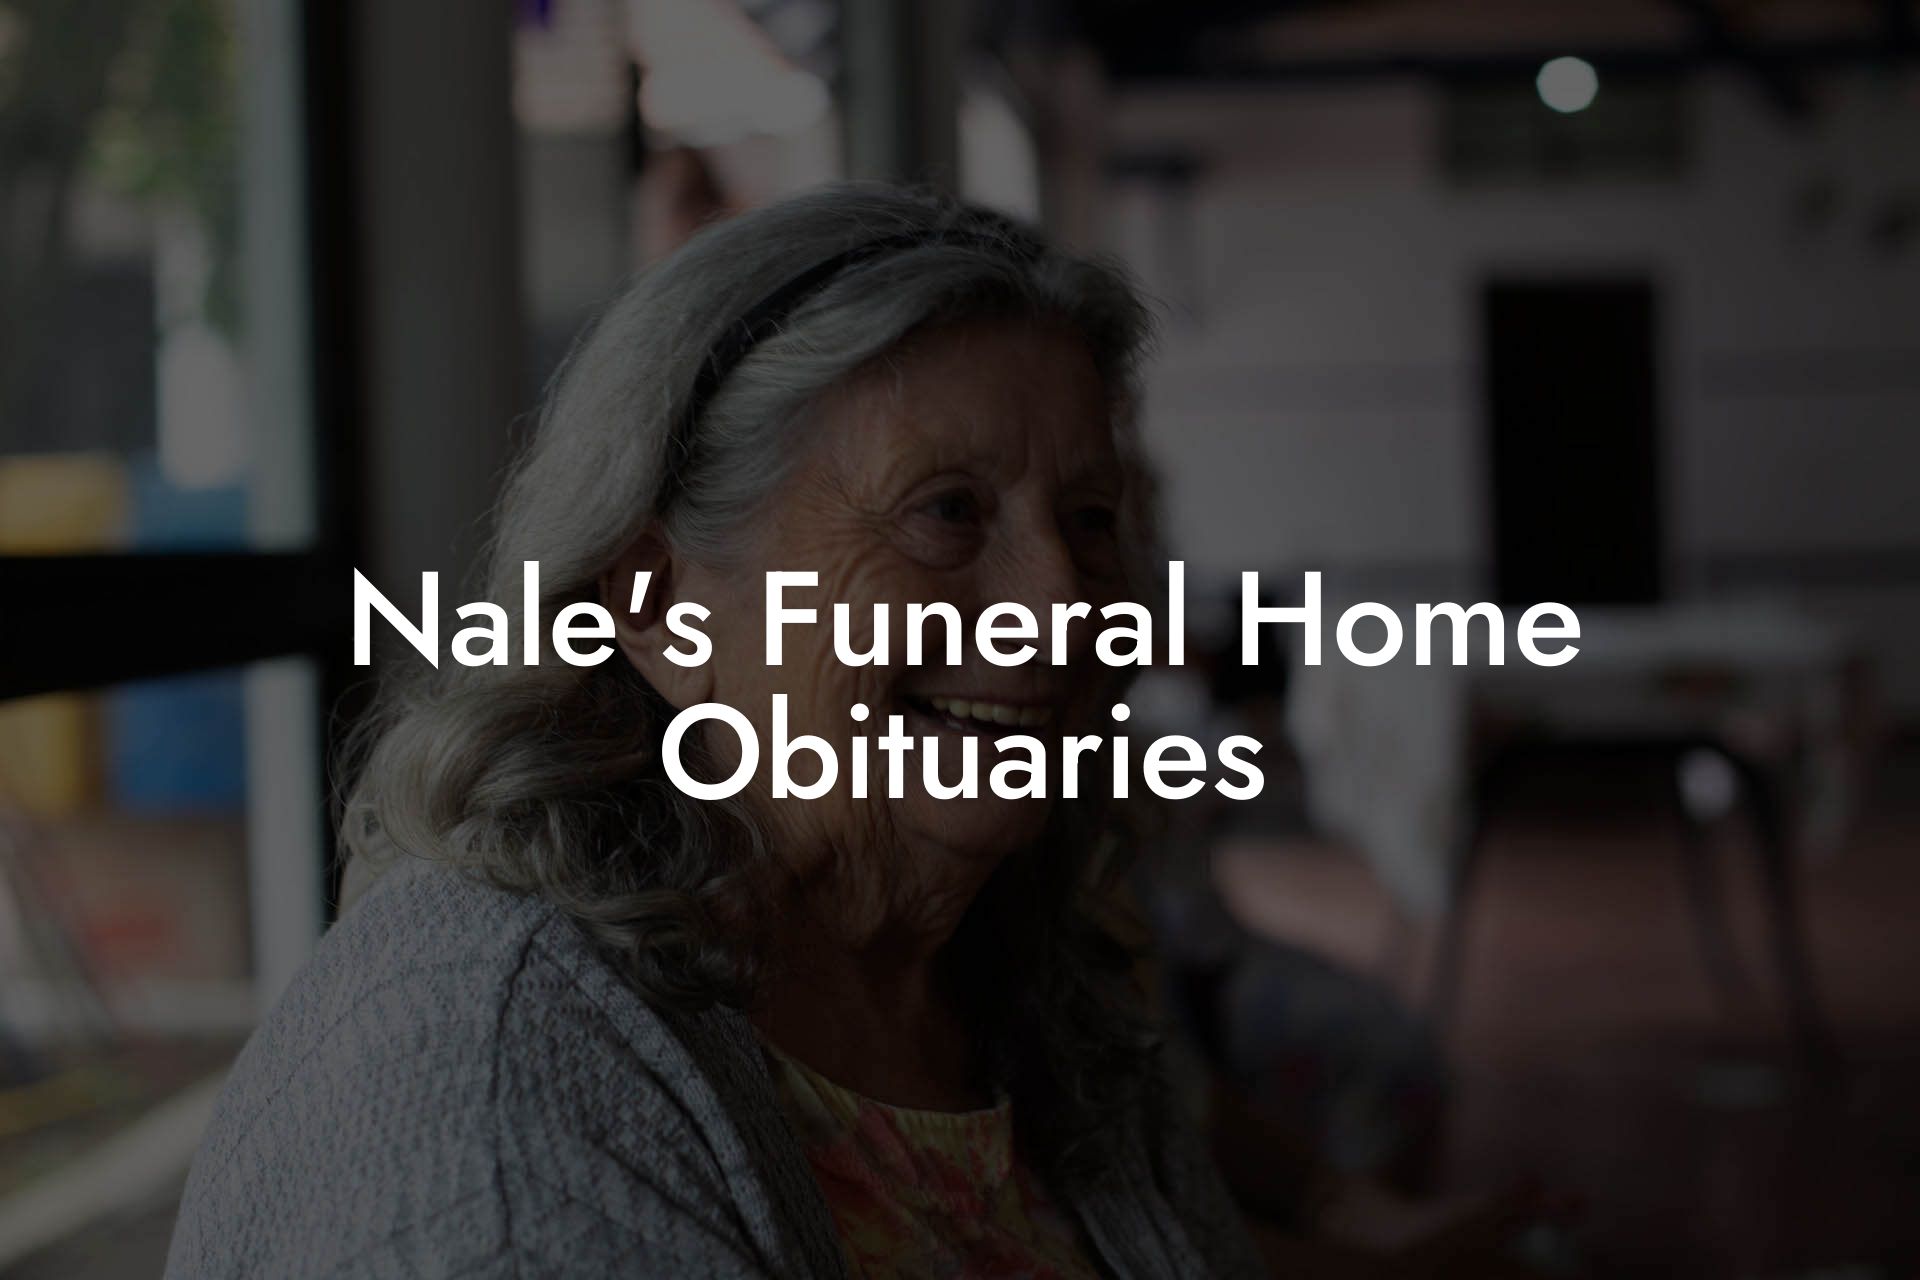 Nale's Funeral Home Obituaries